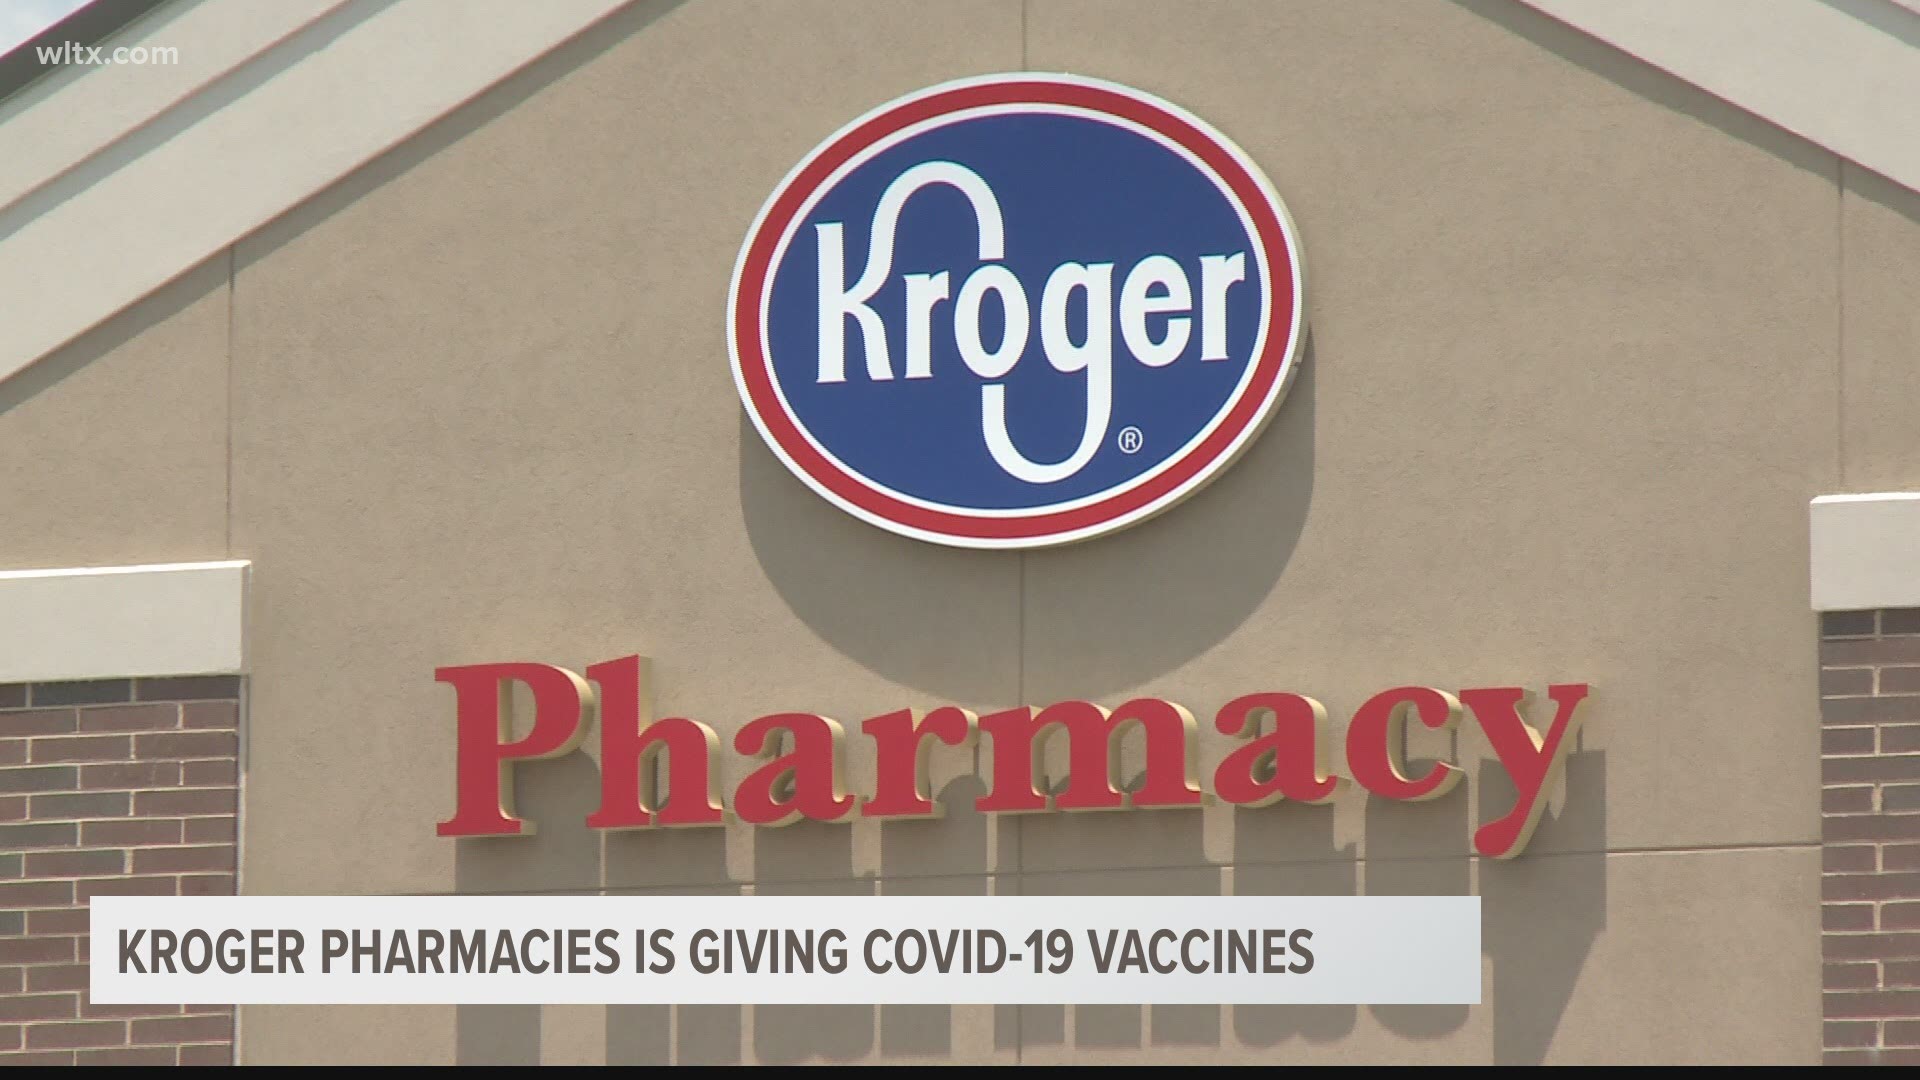 The supermarket chain will be offering the vaccine.